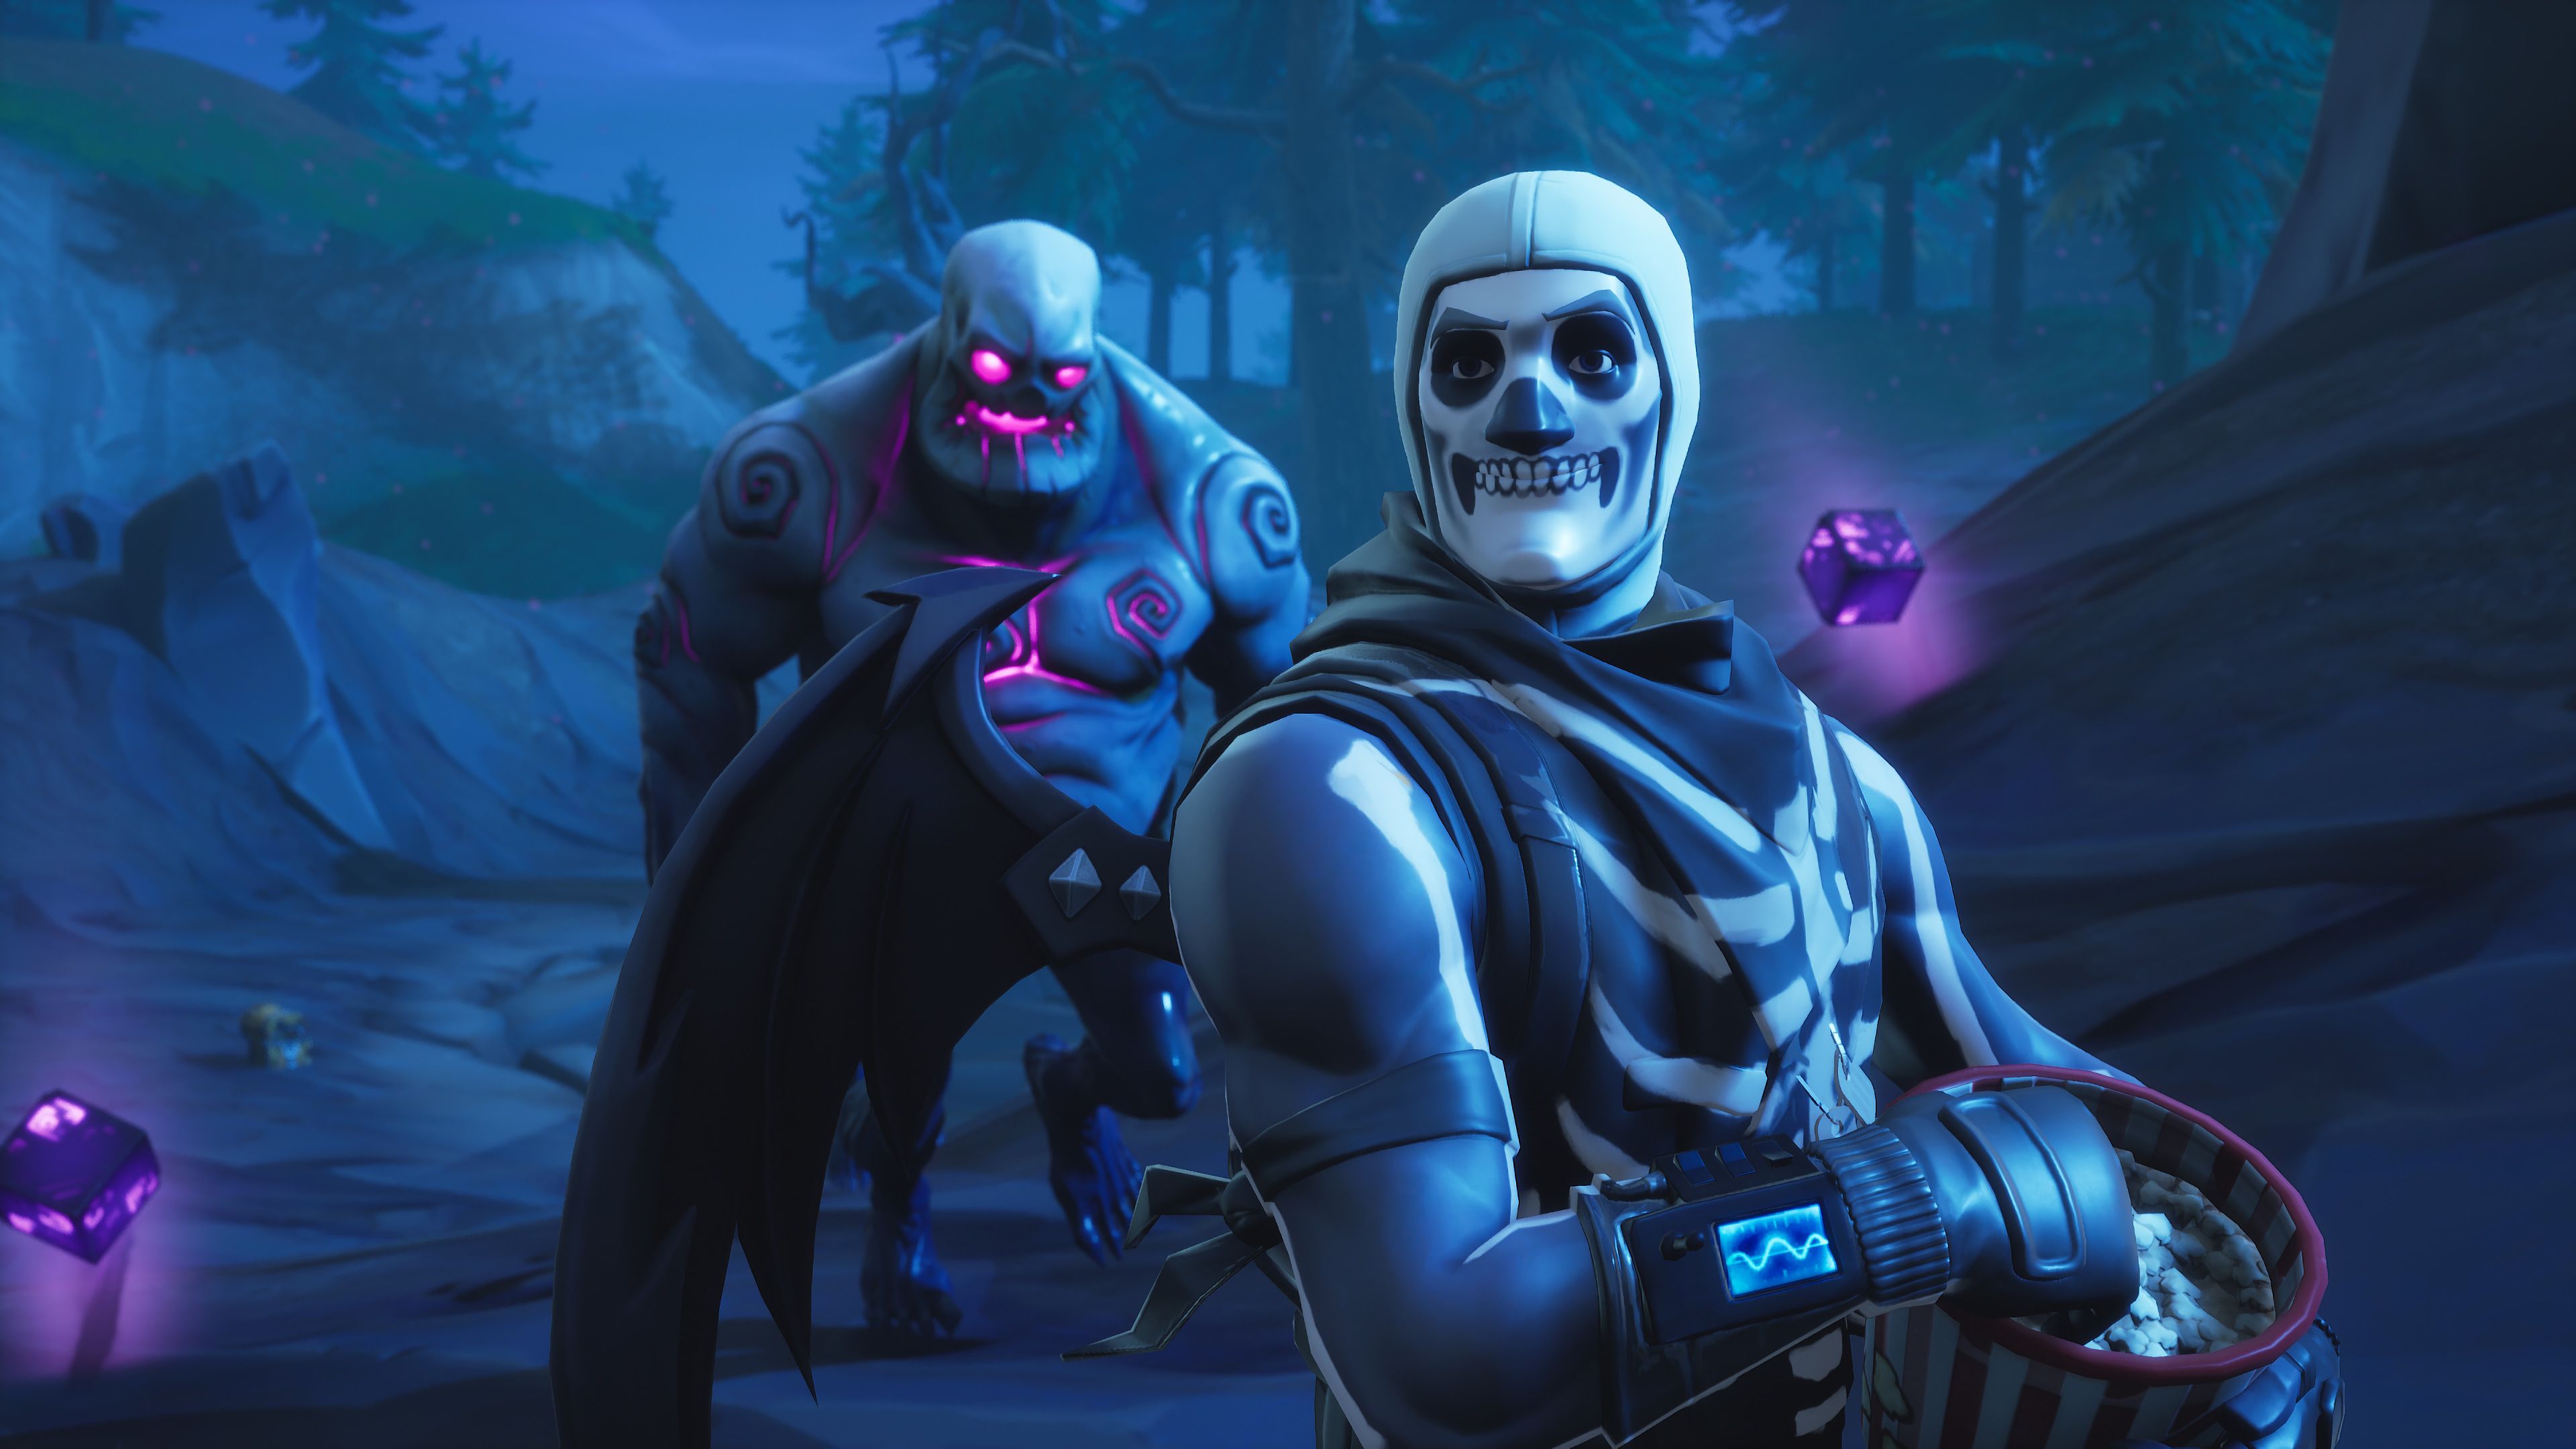 Fortnitemares Part 3 Challenges Bug allowed players to obtain 350 Battle Stars